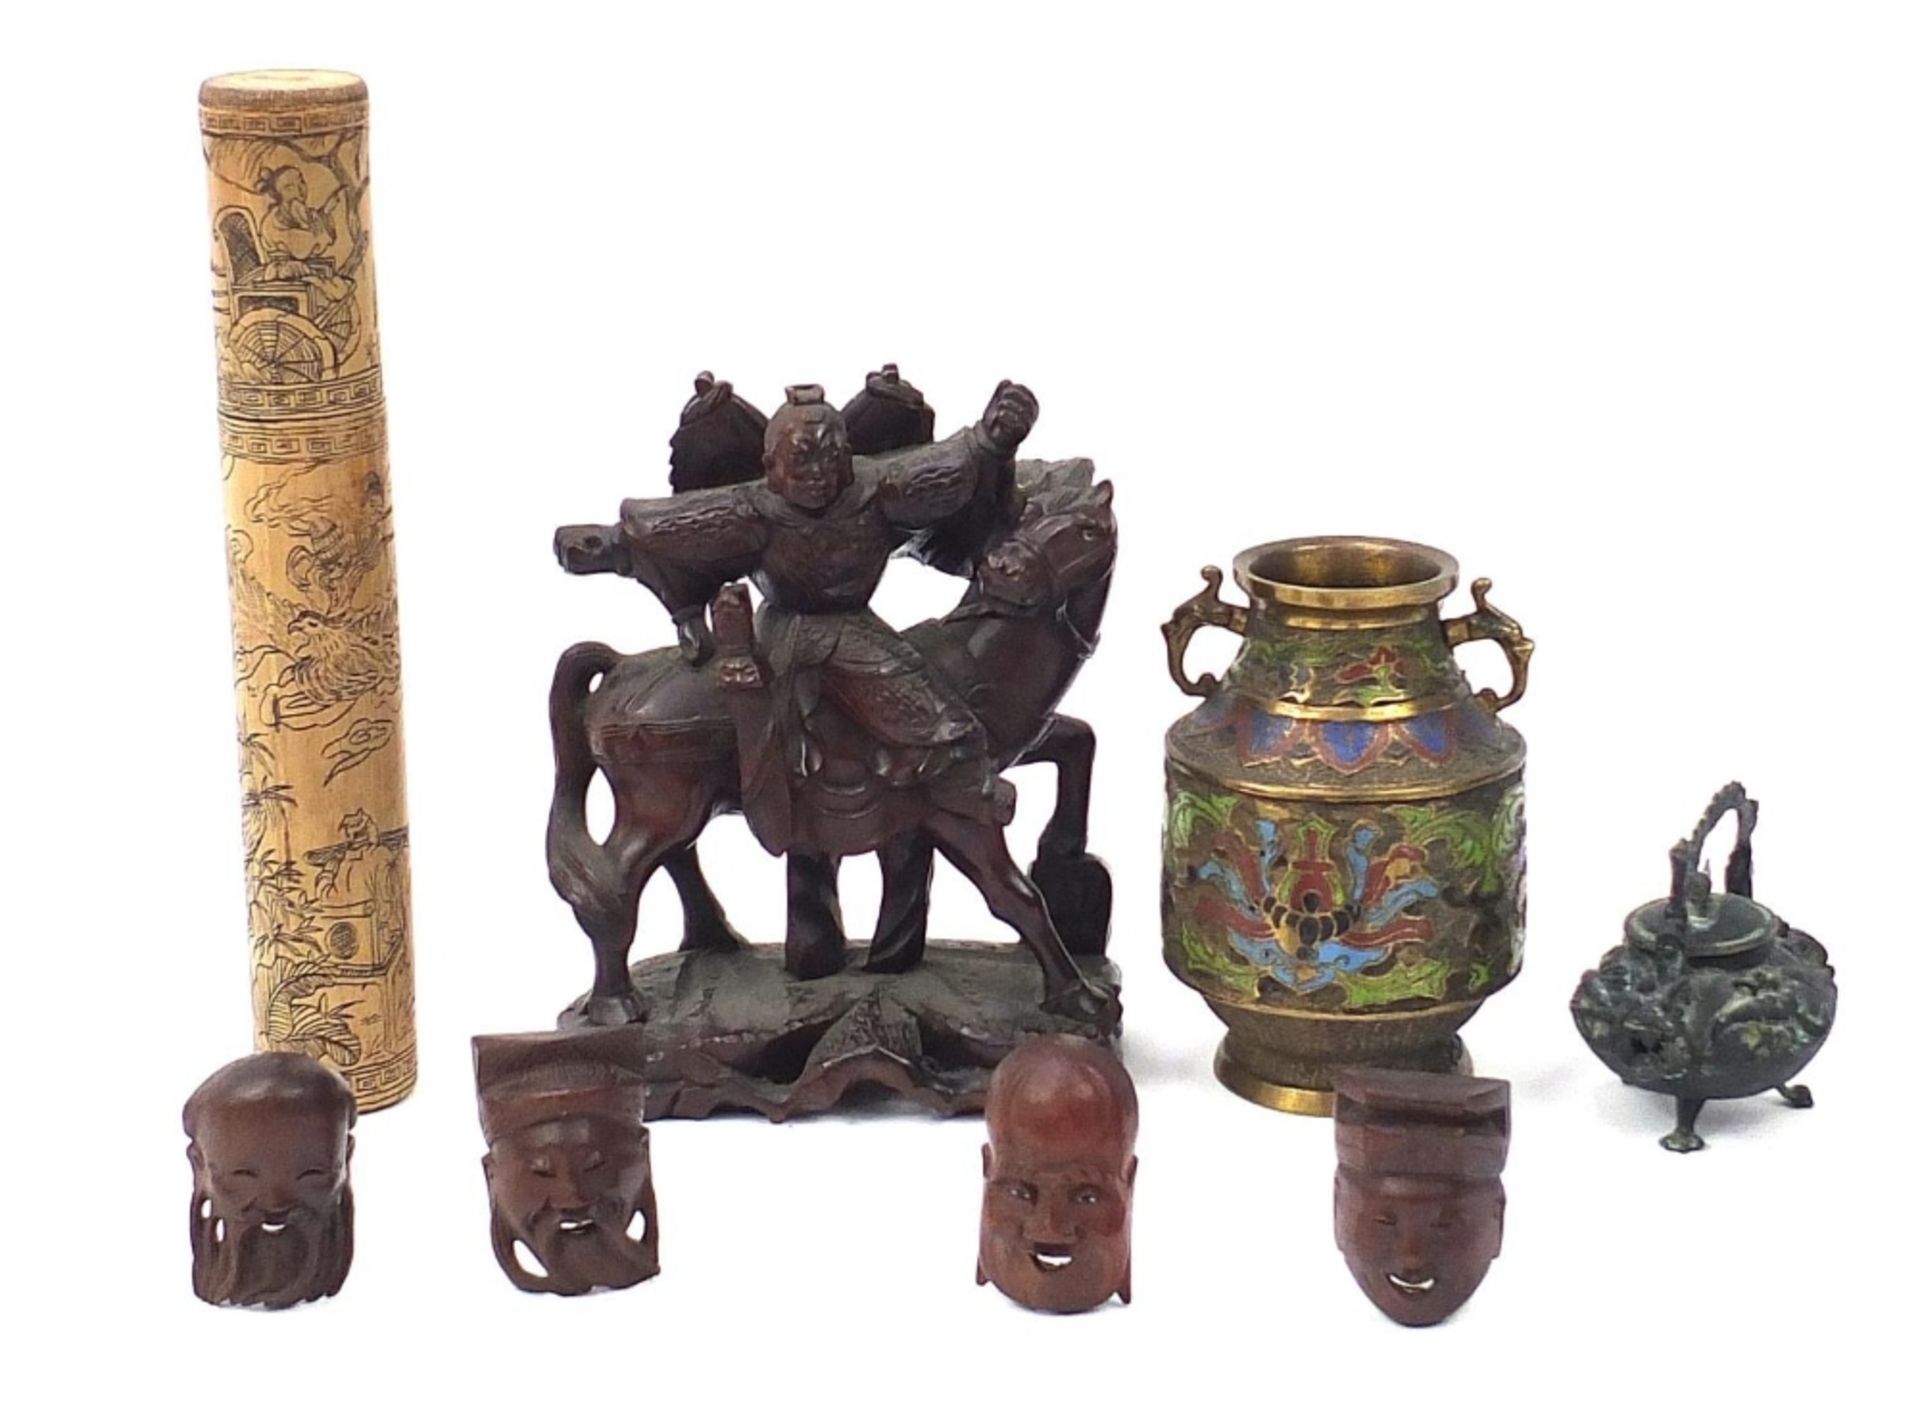 Chinese wooden and metalware including a cloisonne enamel vase, bronze dragon teapot, bamboo